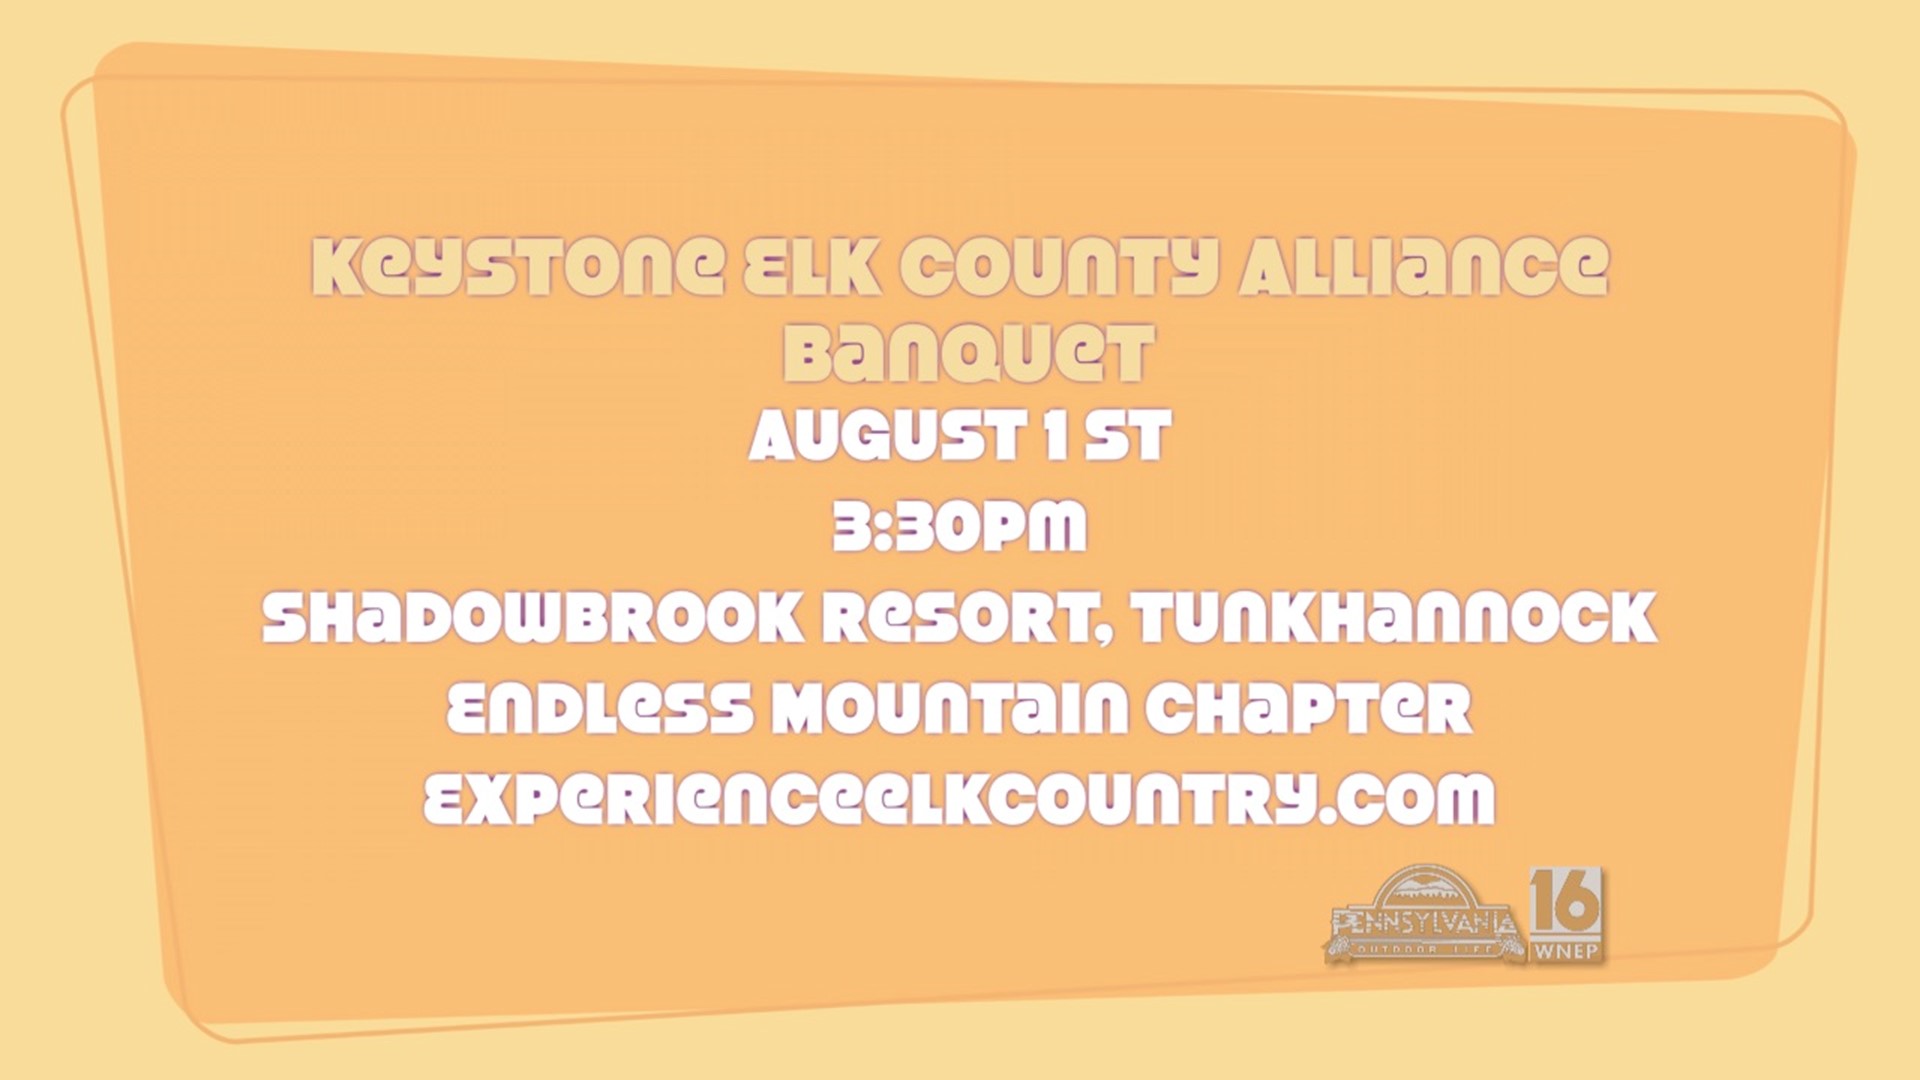 Get involved with the Keystone Elk County Alliance